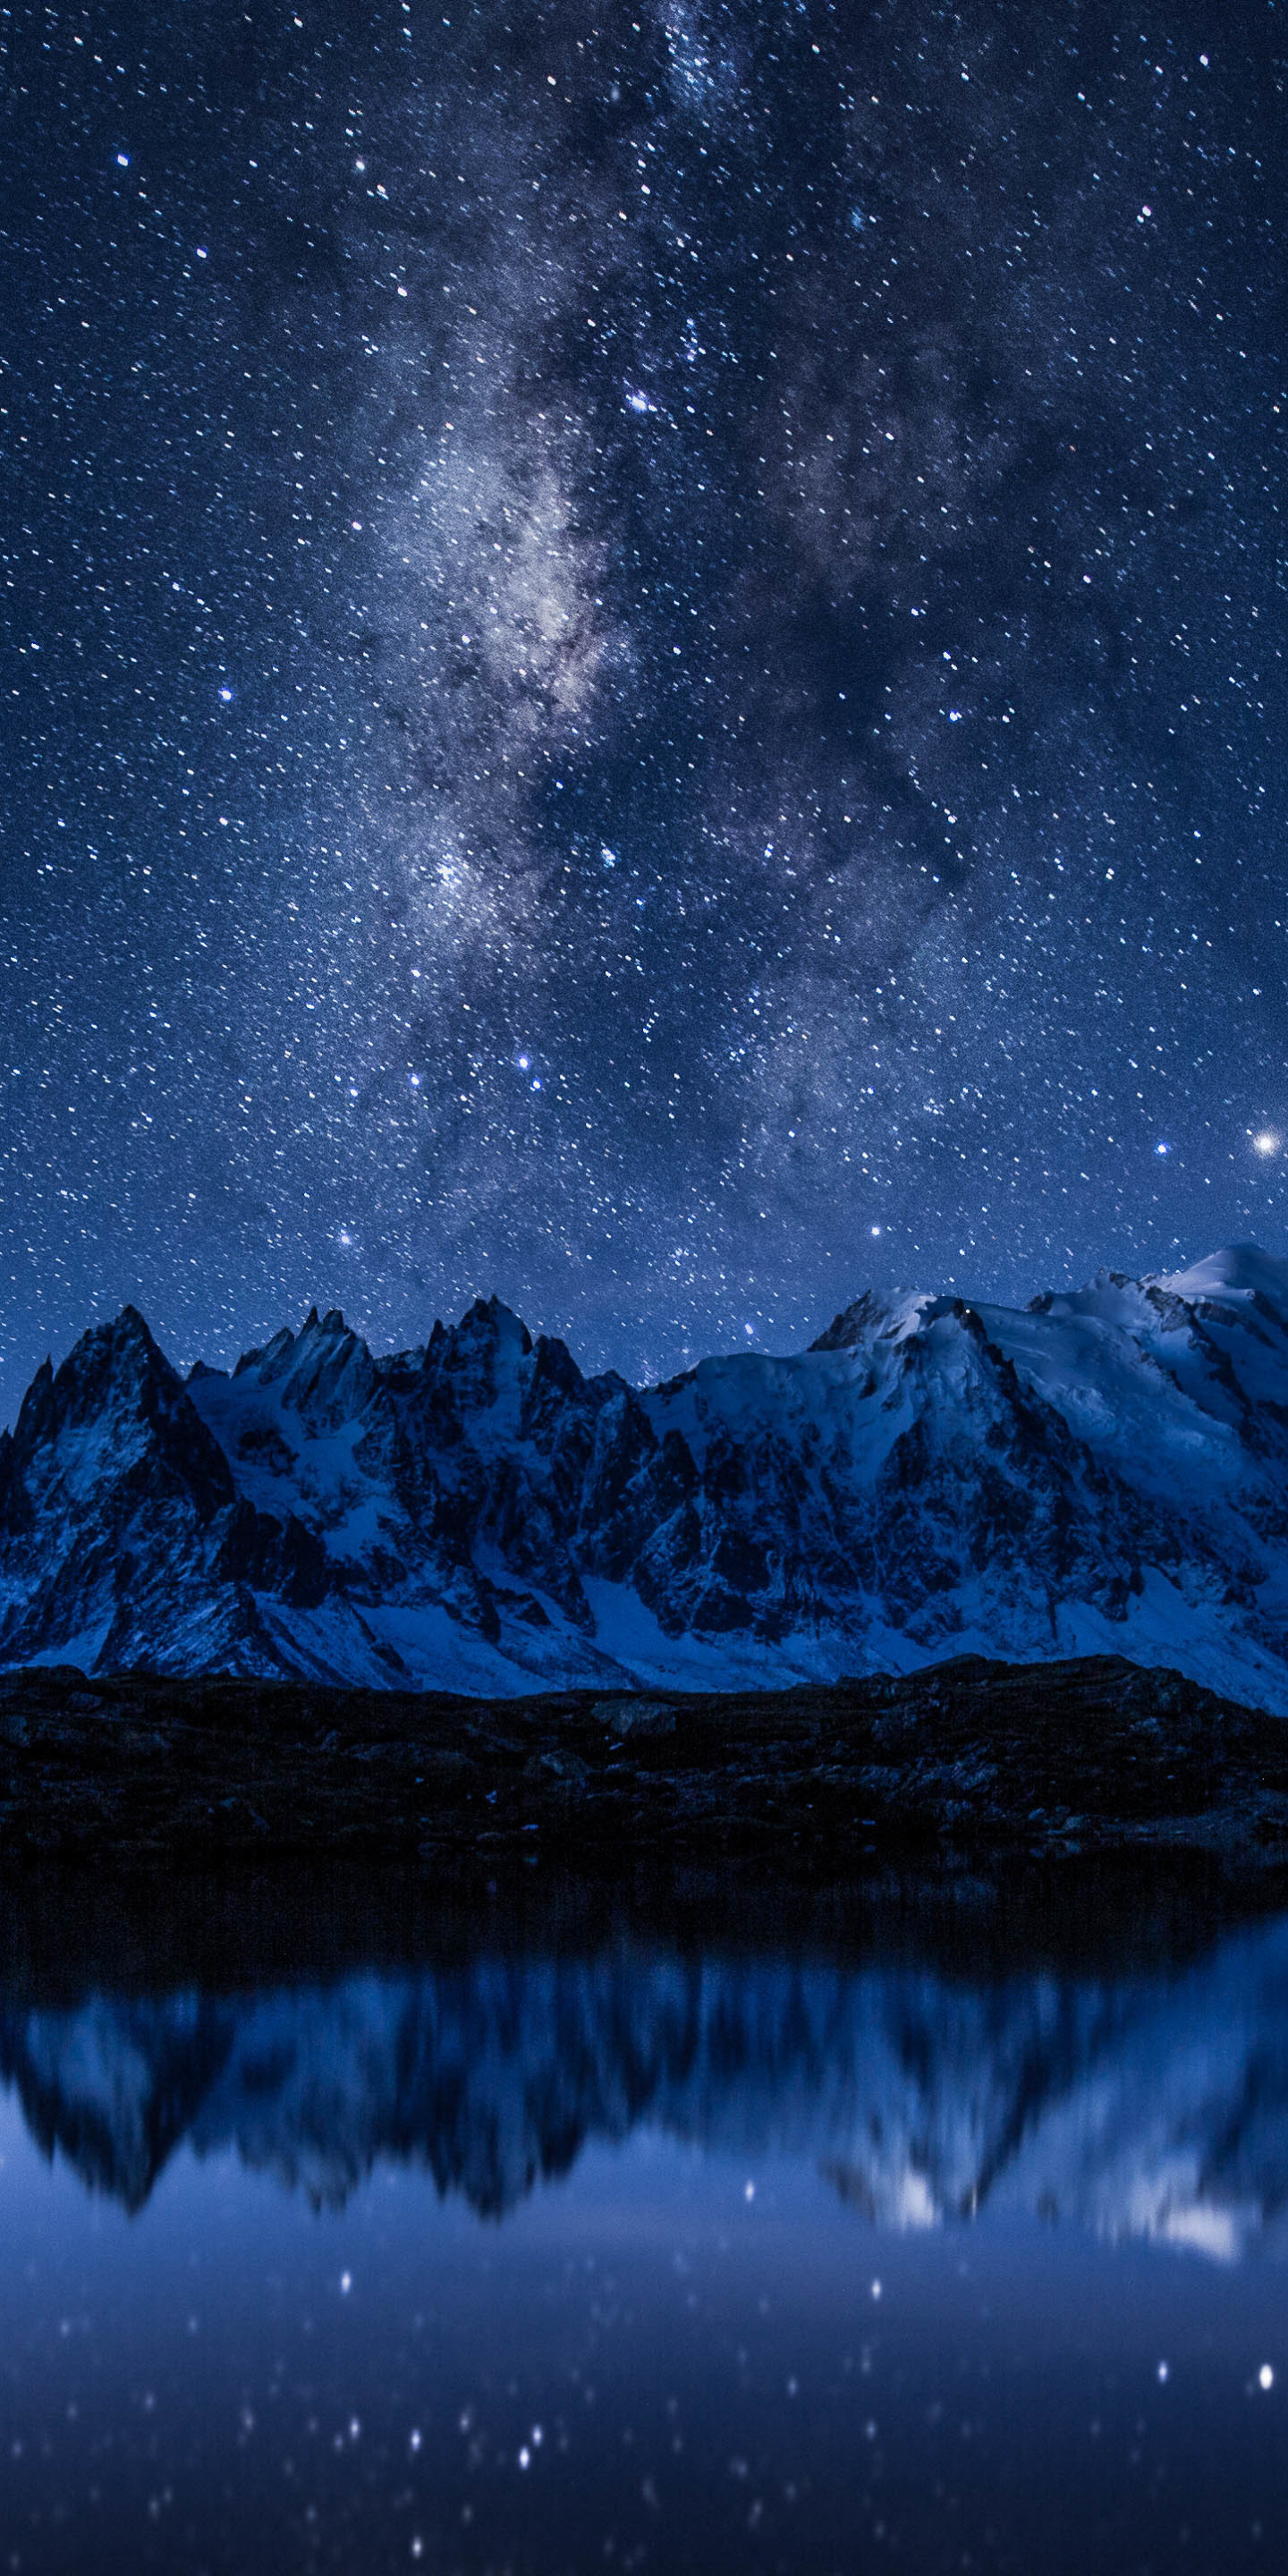 1287529 free wallpaper 720x1280 for phone, download images mountain, milky way, stars, landscape 720x1280 for mobile